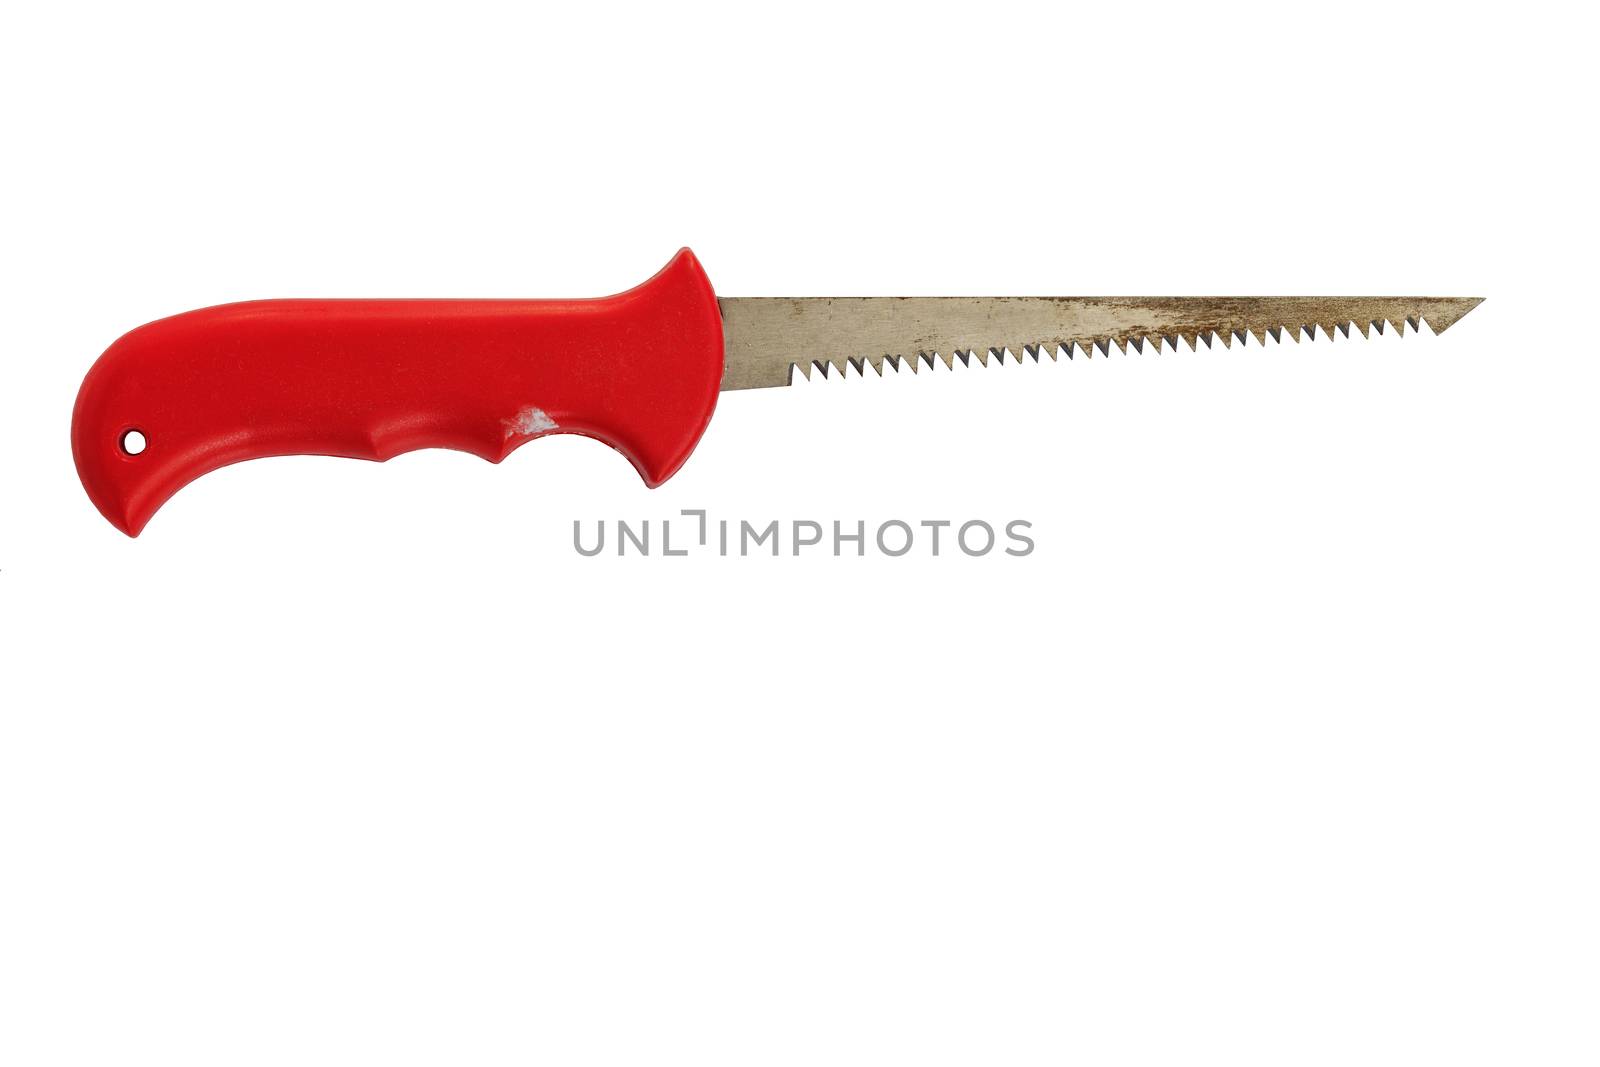 Manual narrow old saw for carpentry or trimming, isolated on white background by Sergii